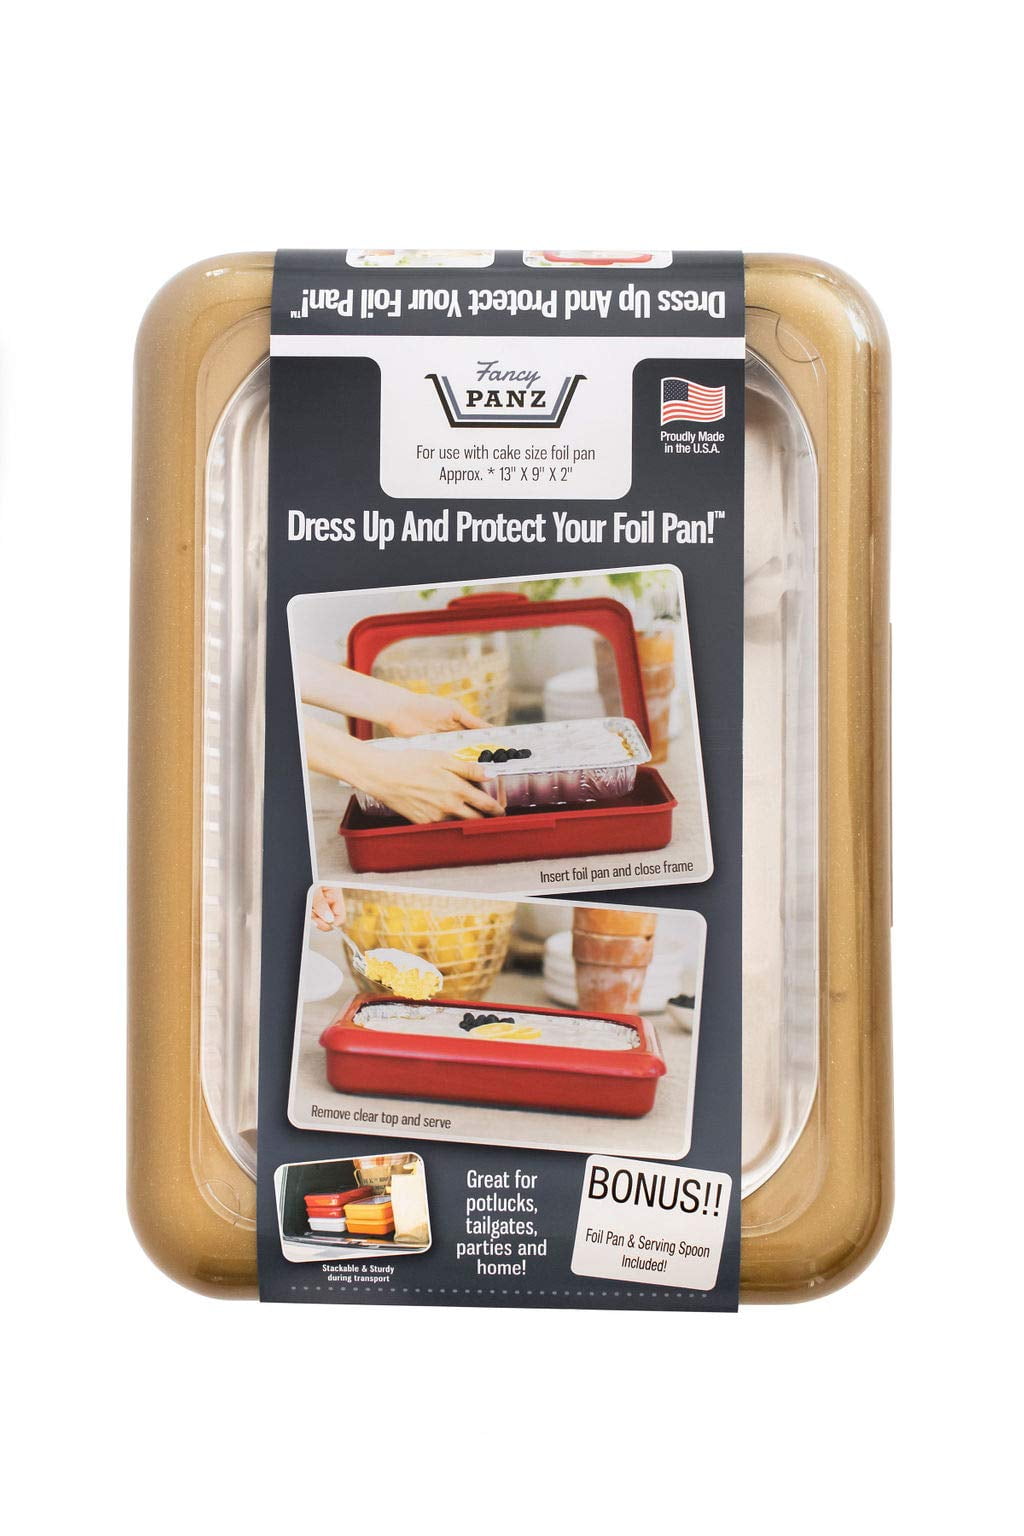 Fancy Panz Premium Dress Up & Protect Your Foil Pan, Made in USA. Hot/Cold  Gel Pack, One Half Sized Foil Pan & Serving Spoon Included. Stackable for